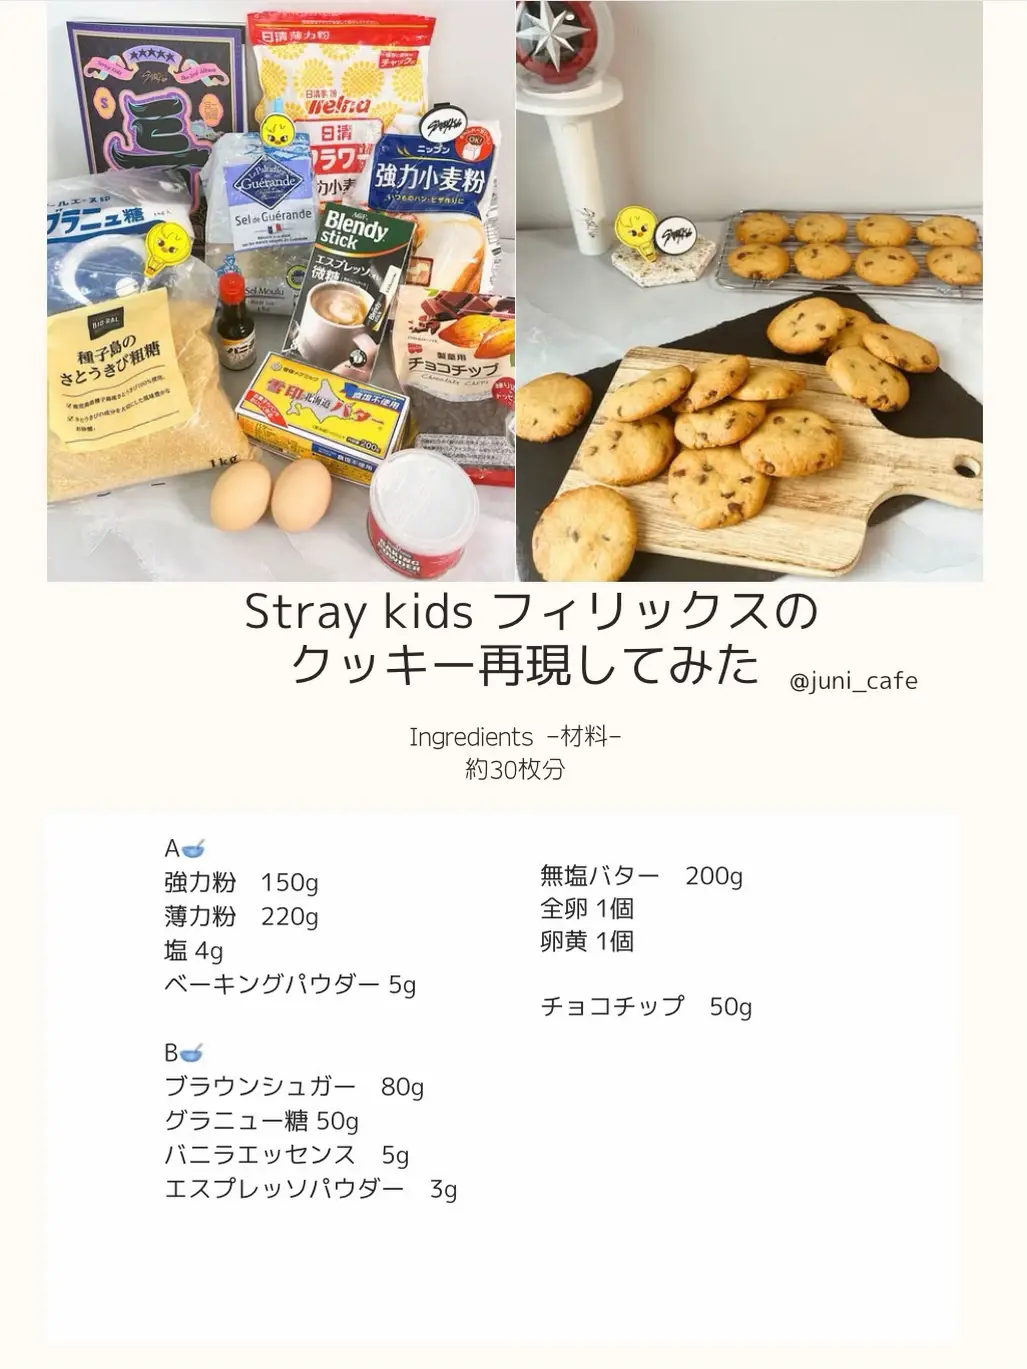 Stray Kids Felix's Chocolate Chip Cookie Recipe: Here's How To Make His  Signature Snack